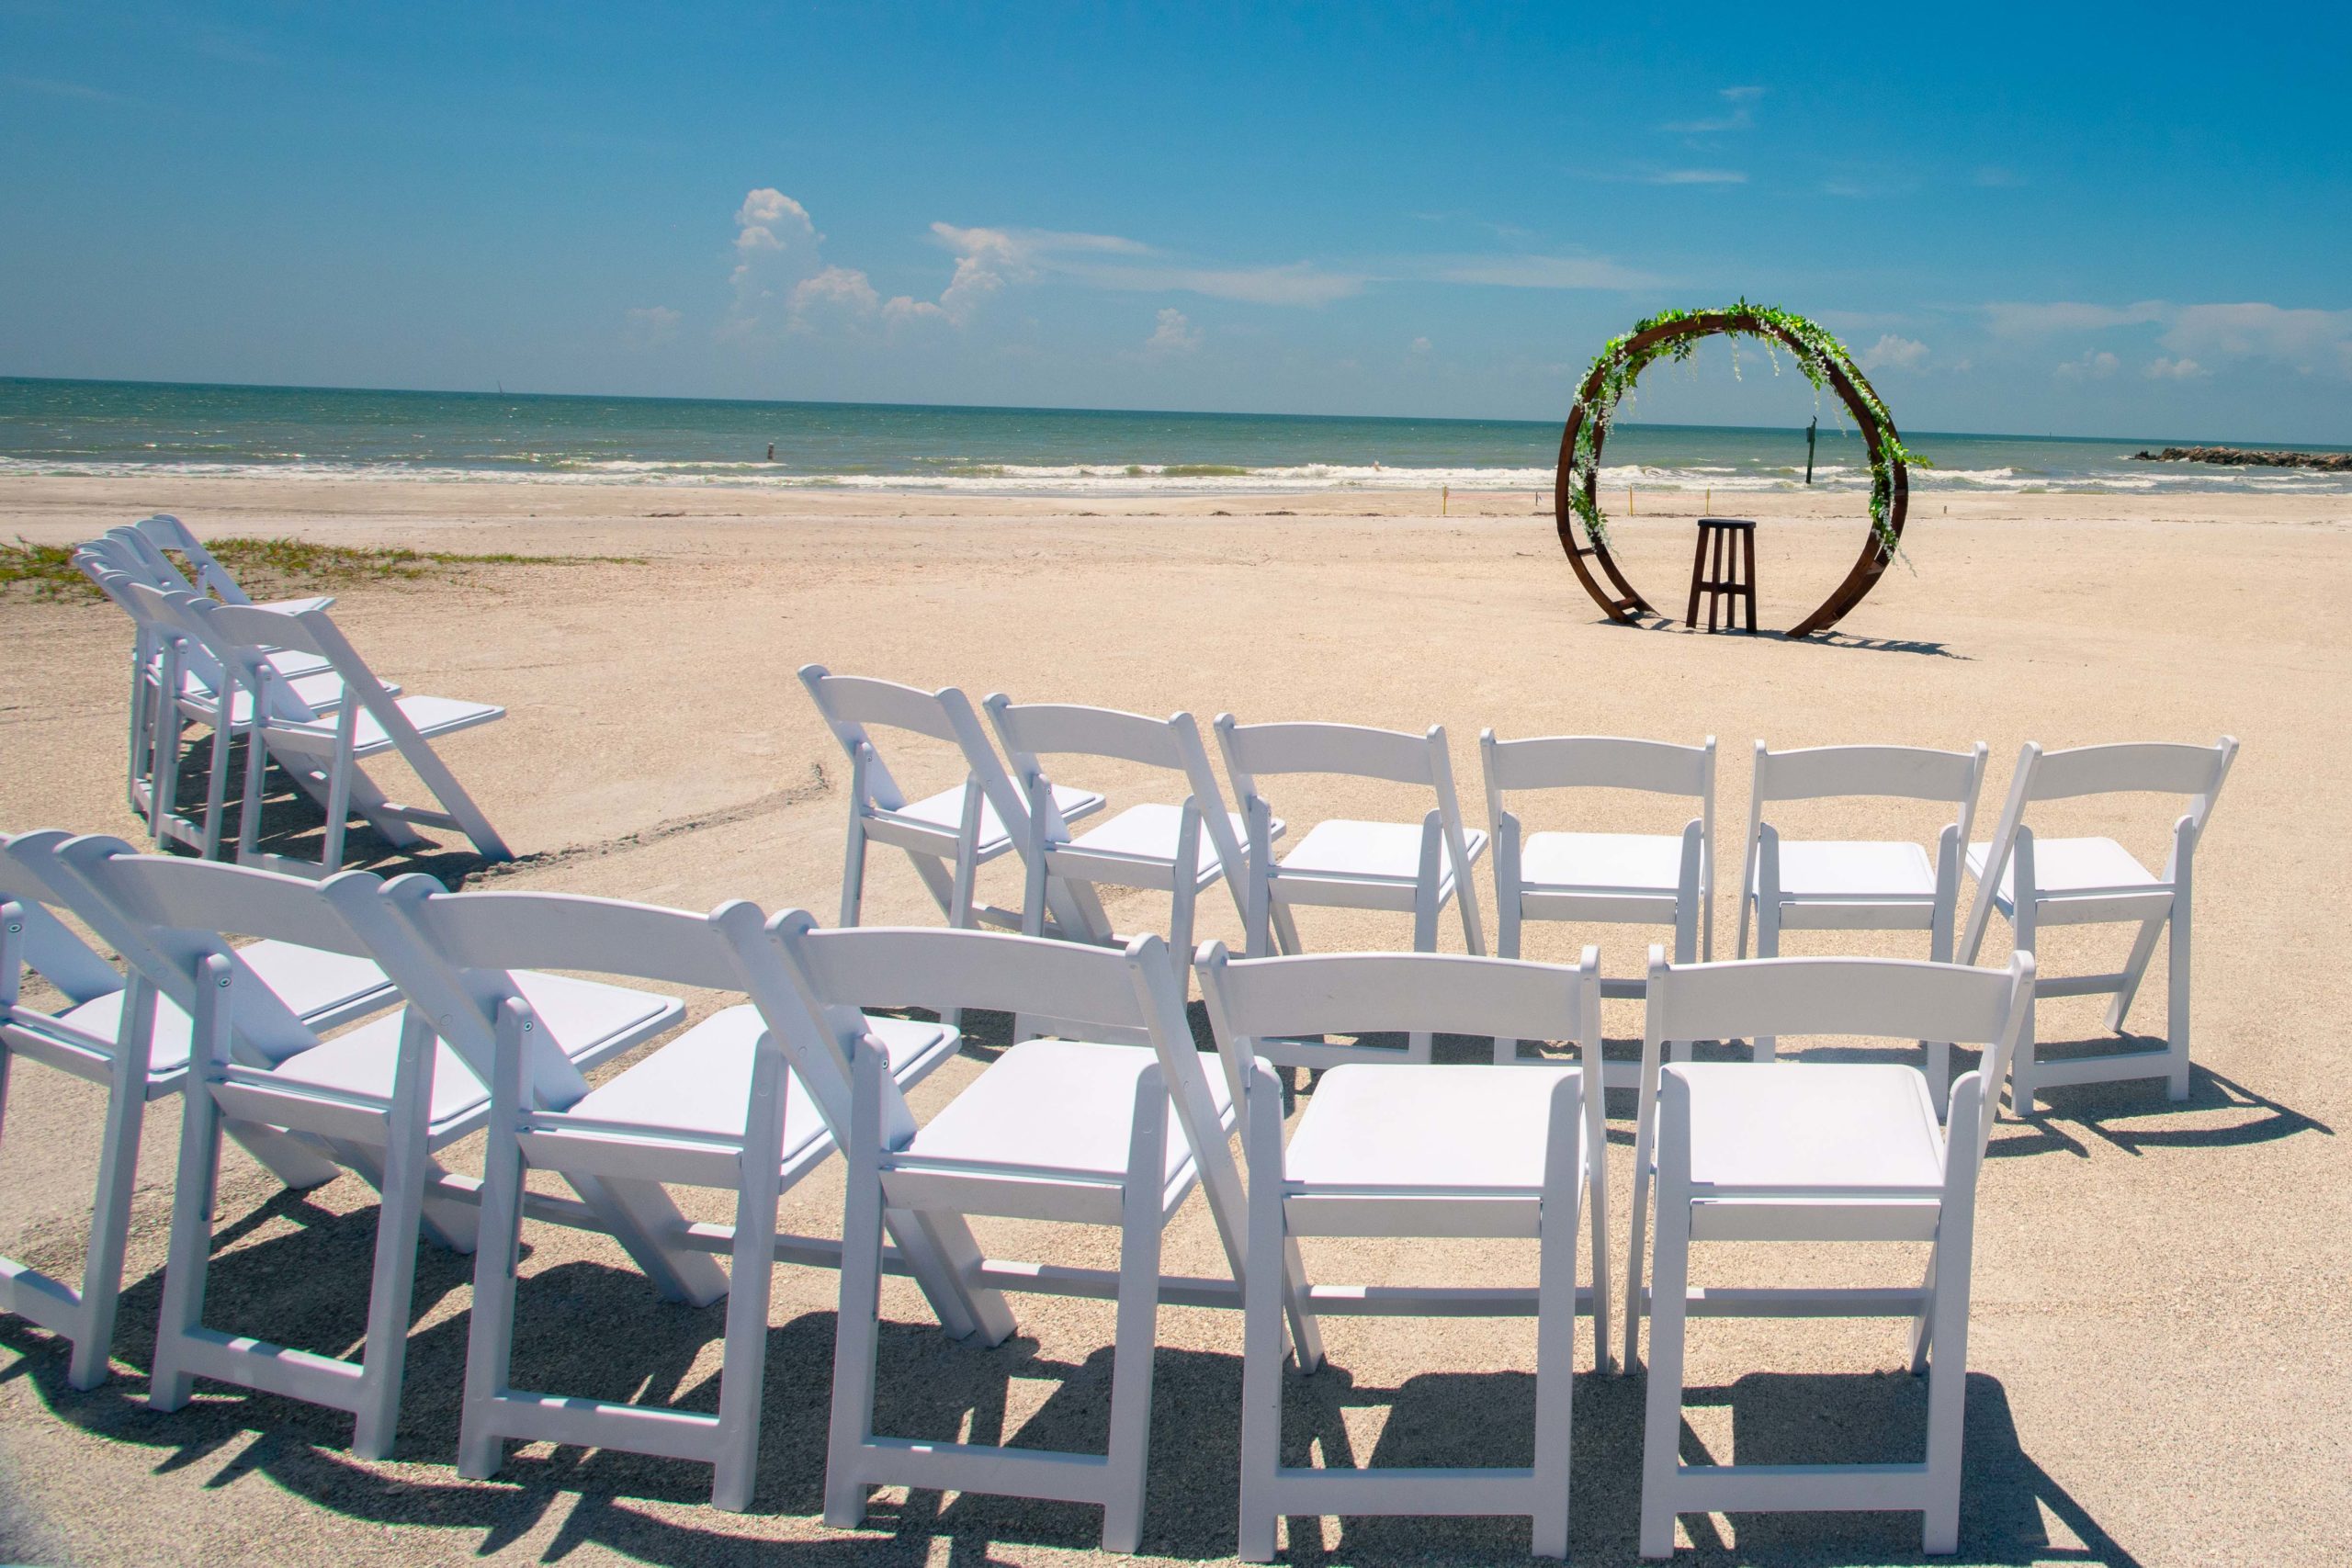 Two rows of chairs arranged in a semi-circle before circular wooden arch on the beach.